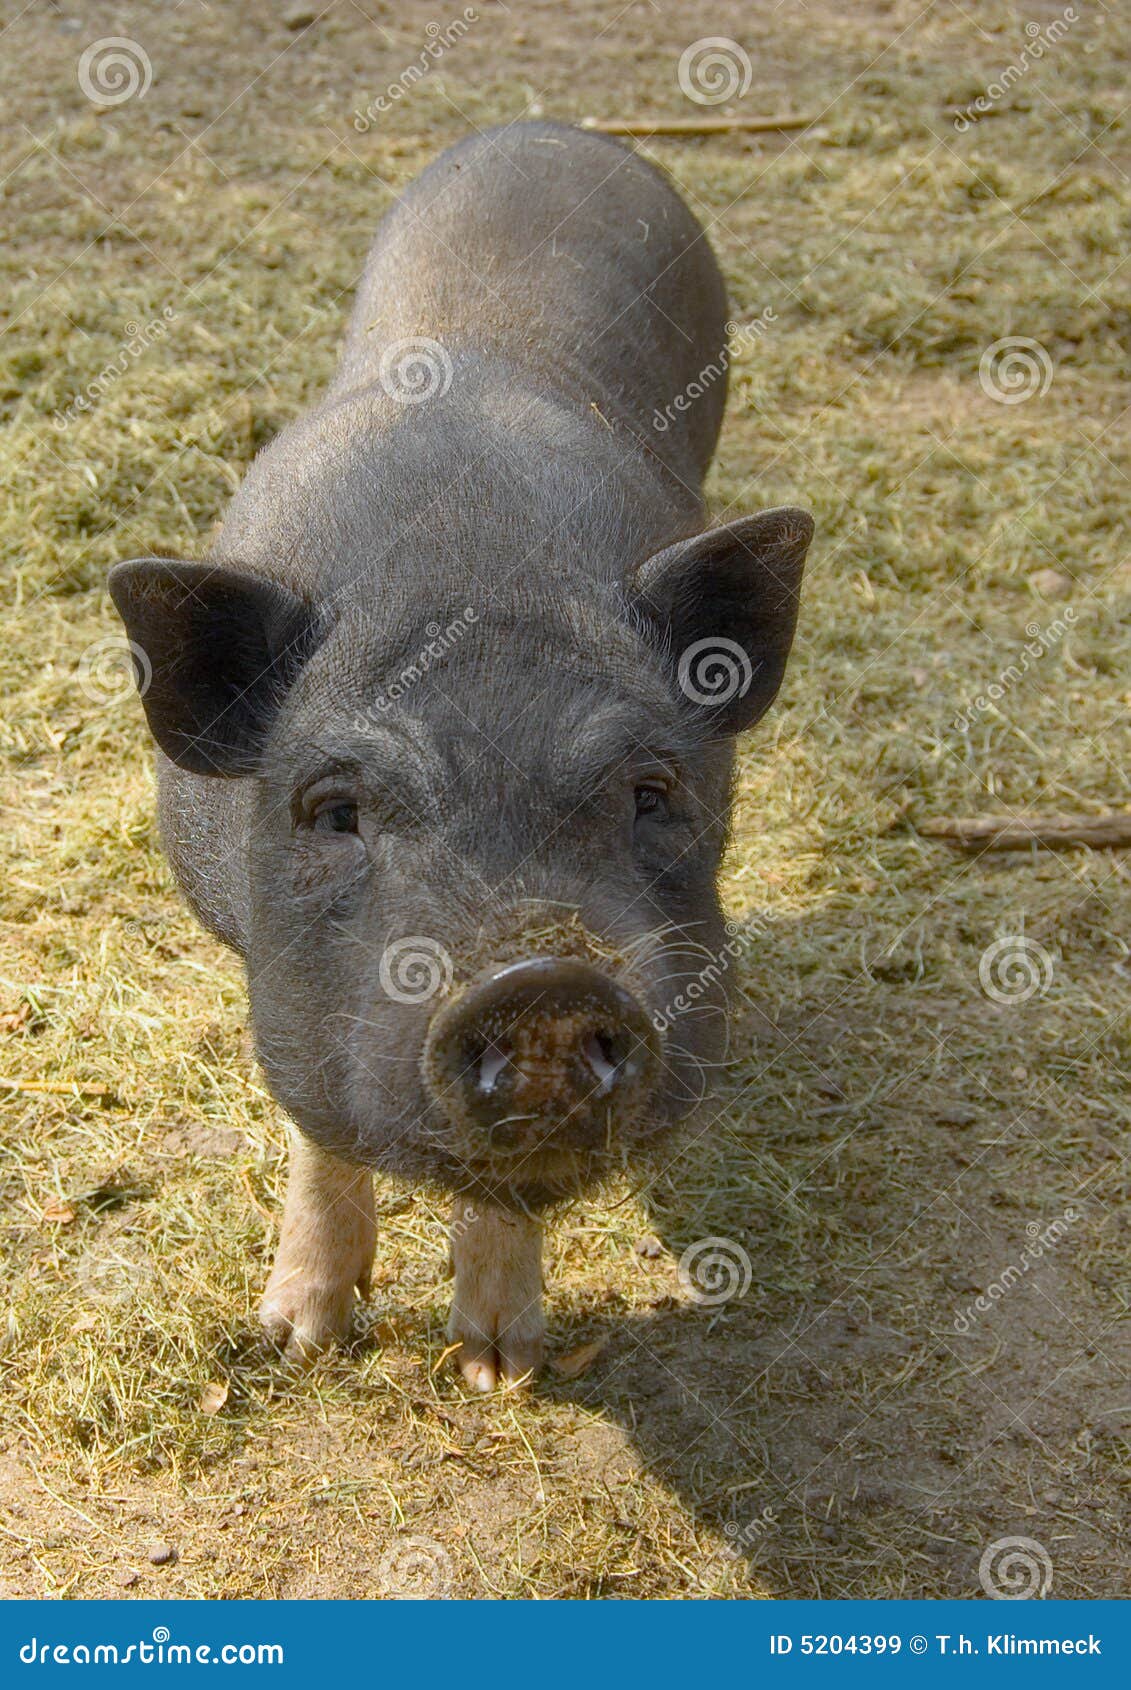 clipart pot bellied pig - photo #46